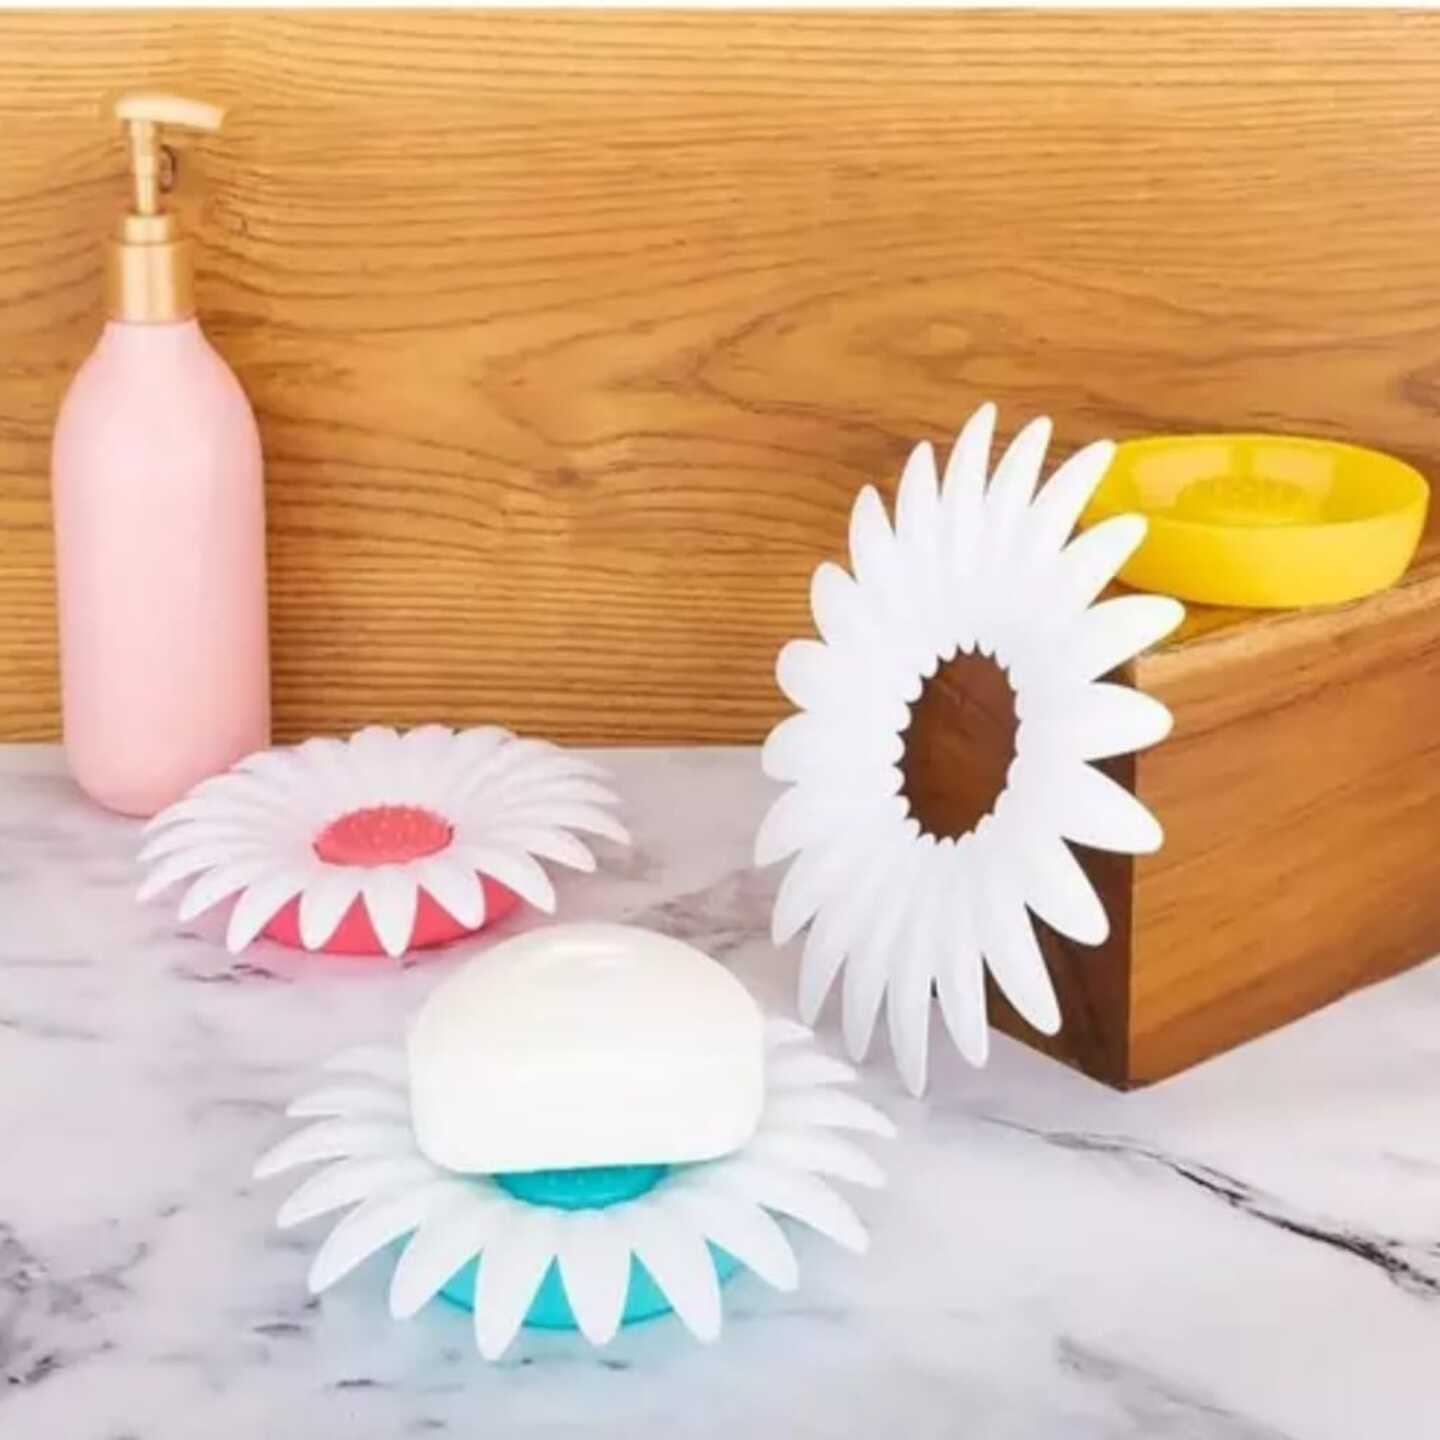 Flower Shape Portable Soap Dish Holder Plastic Soap Case with Liquid Drain Plate for Bathroom and Kitchen..Assorted Colours - Set of 3.